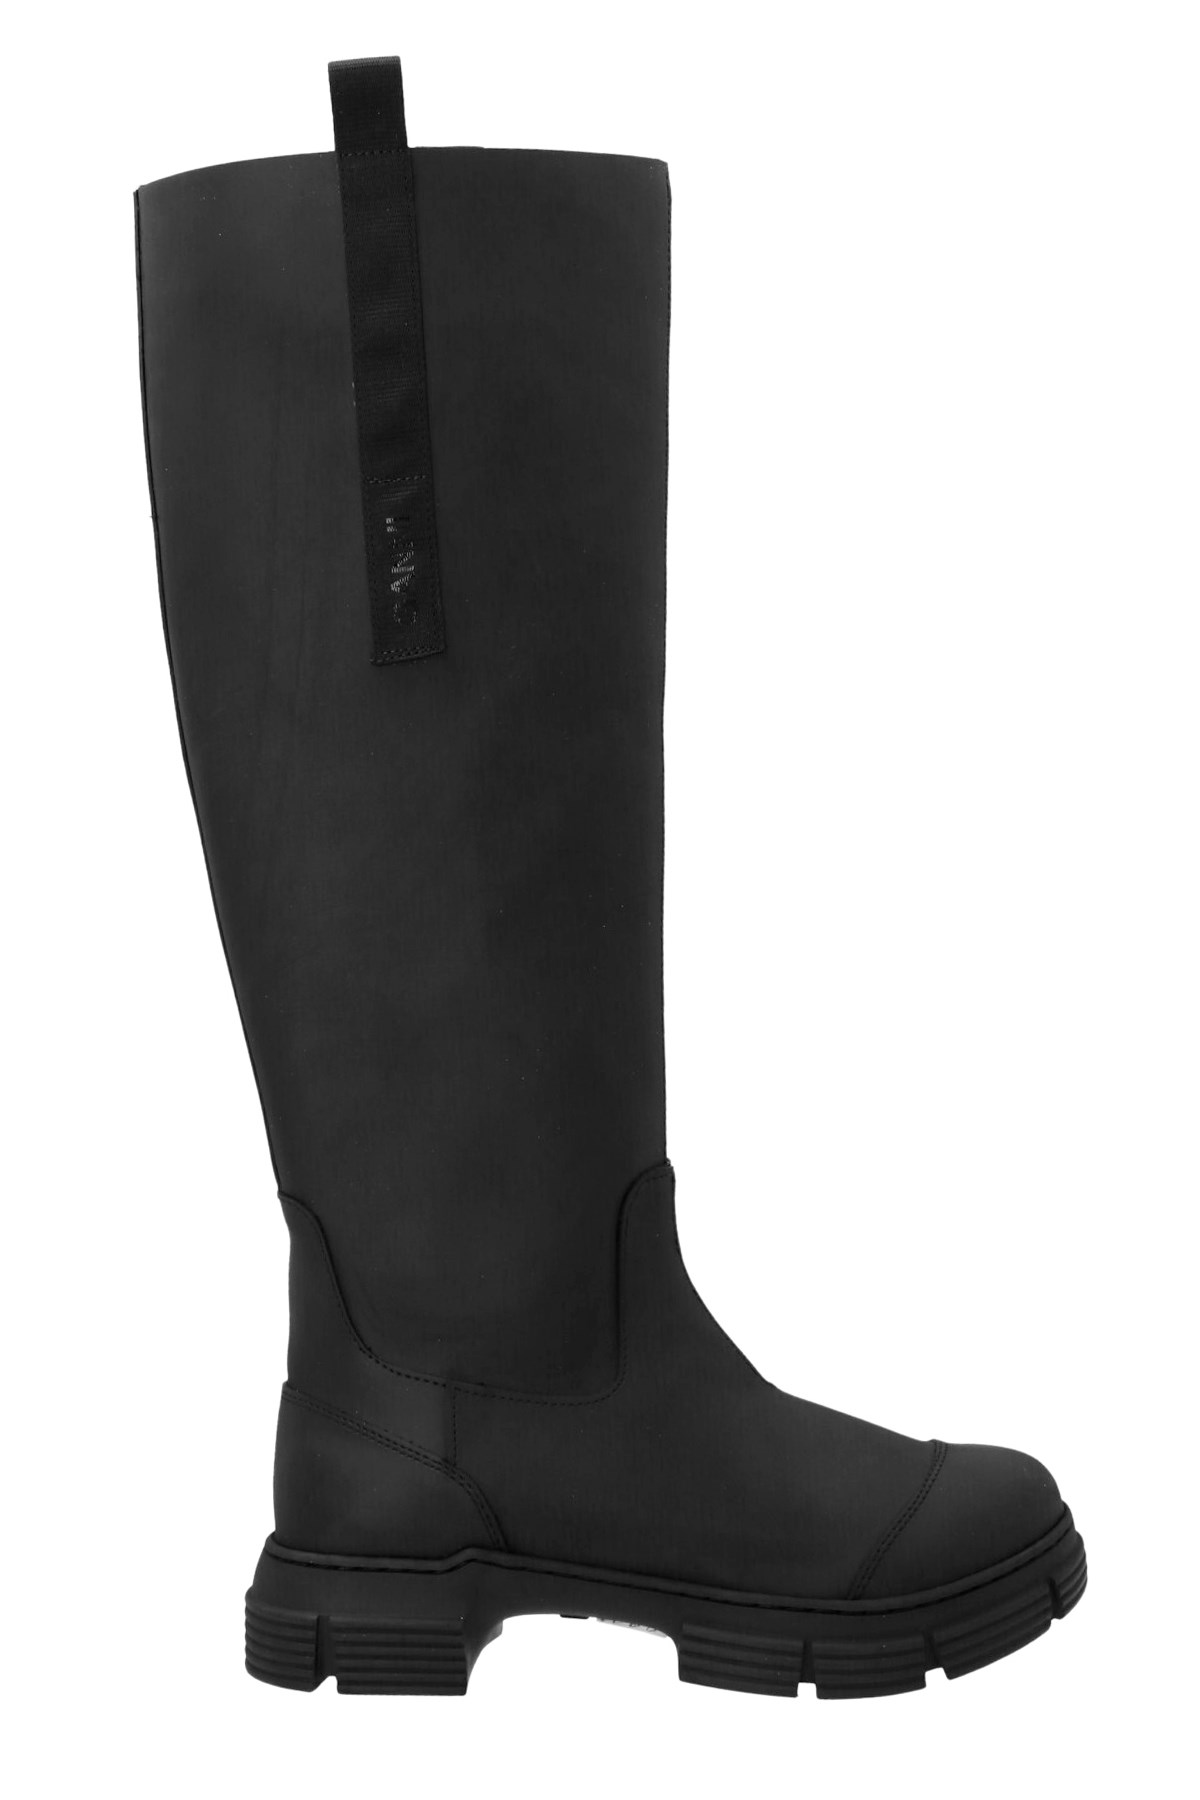 GANNI Recycled Rubber Knee-High Boots